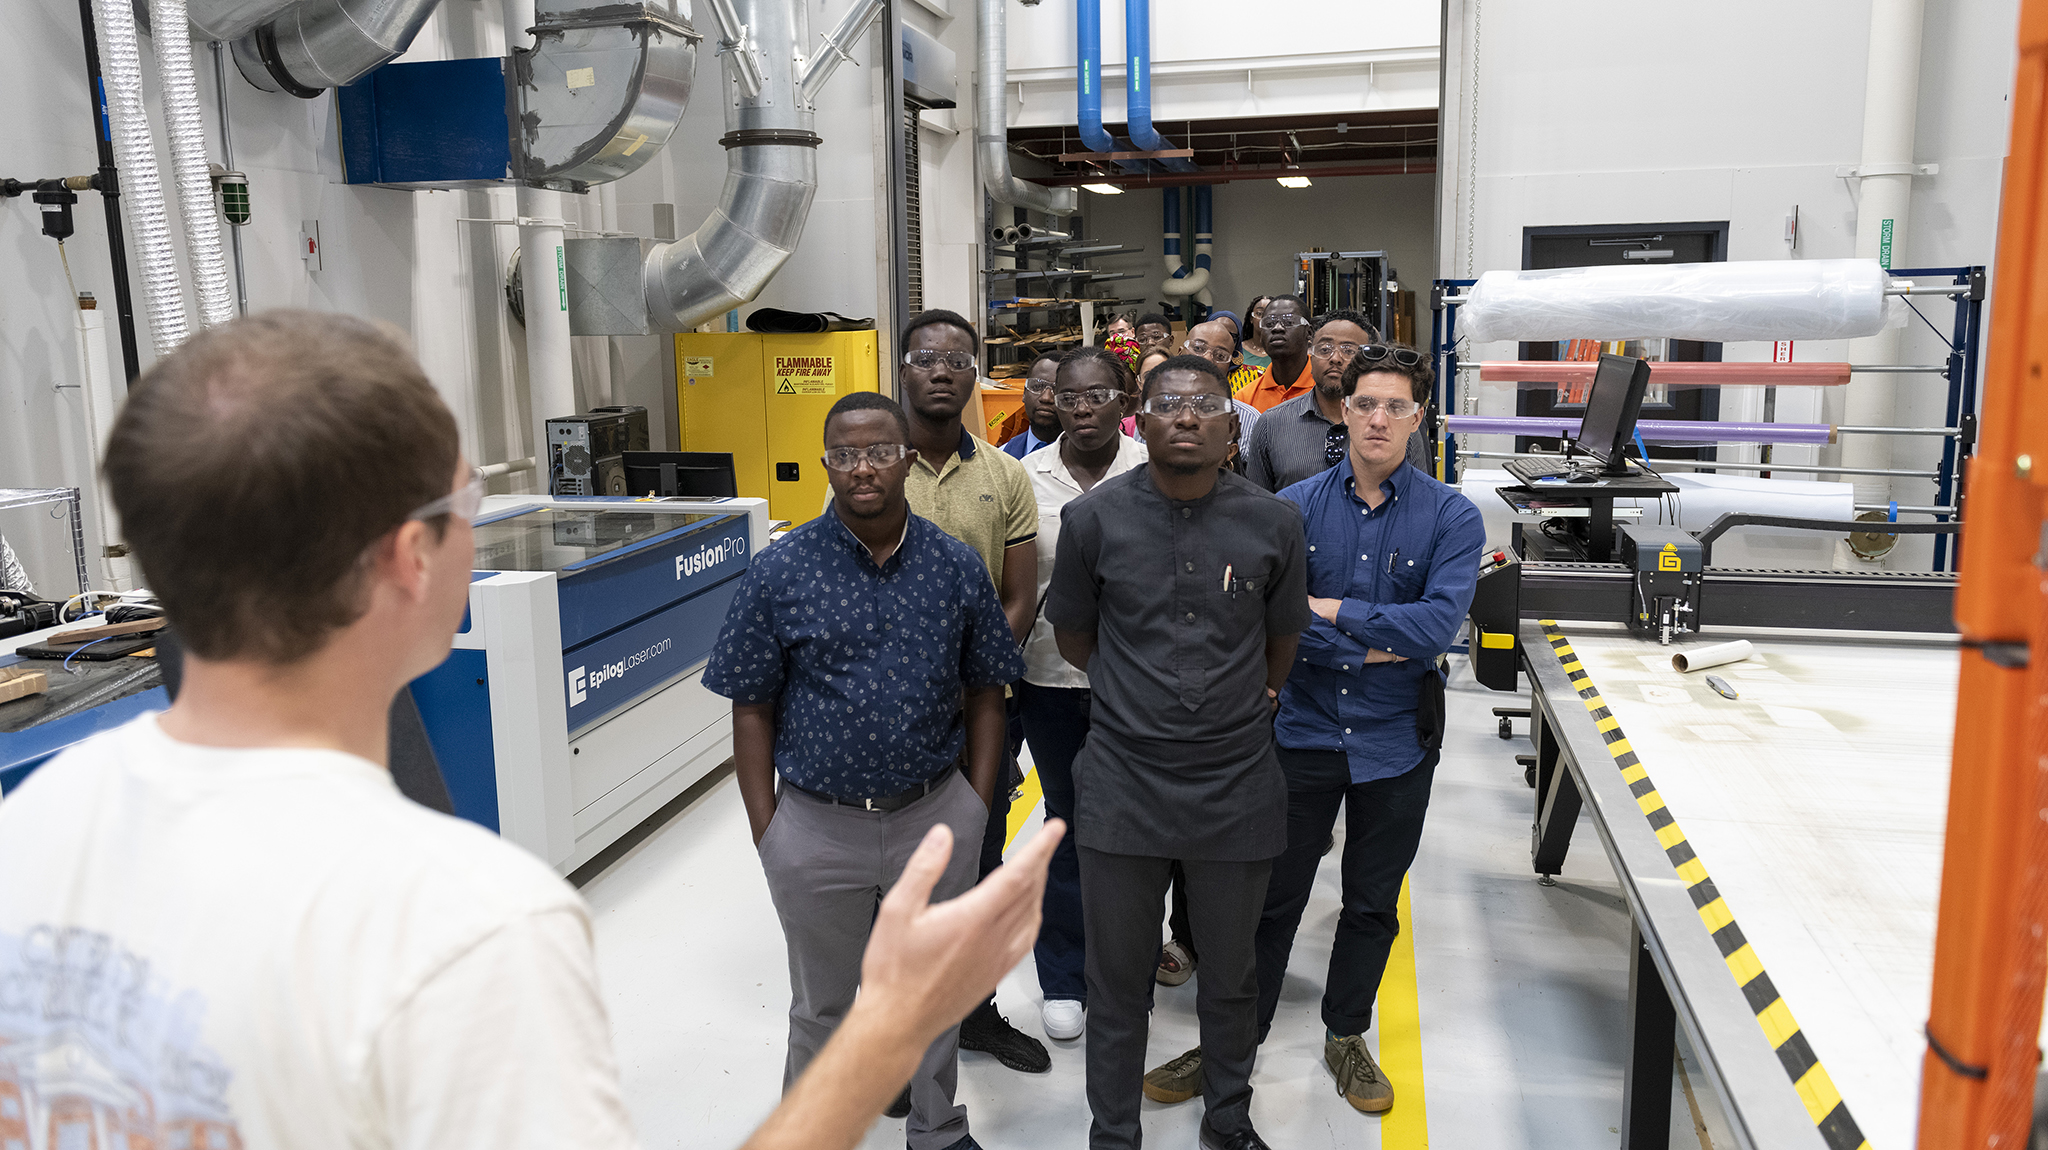 Fellows from the ninth annual cohort of Mandela Washington Fellowship for Young African Leaders tour the Haley Barbour Center for Manufacturing Excellence as a part of the Jackson State University-led group’s visit to Ole Miss. Photo by Sri Chattopadhyay/Ole Miss Digital Imaging Services